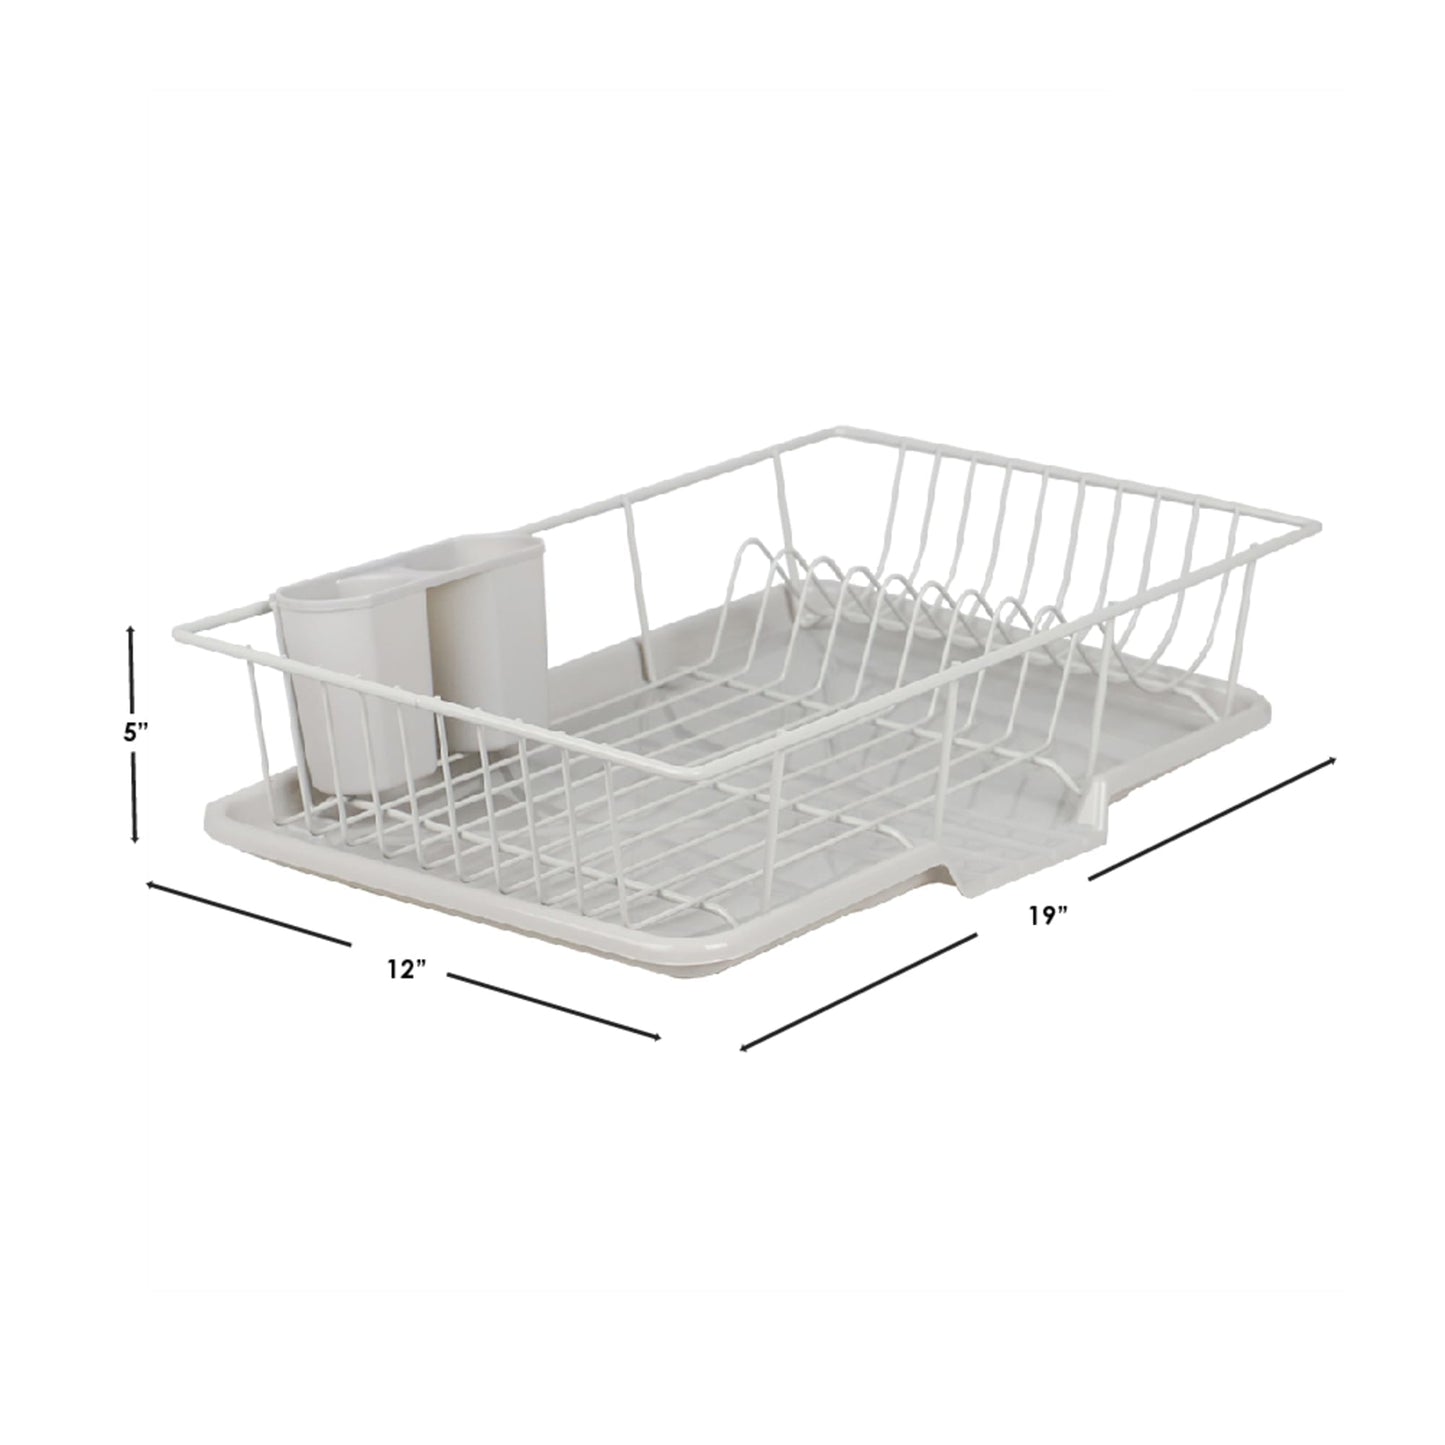 3 Piece Vinyl Coated Steel Dish Drainer with Drip Tray, Silver